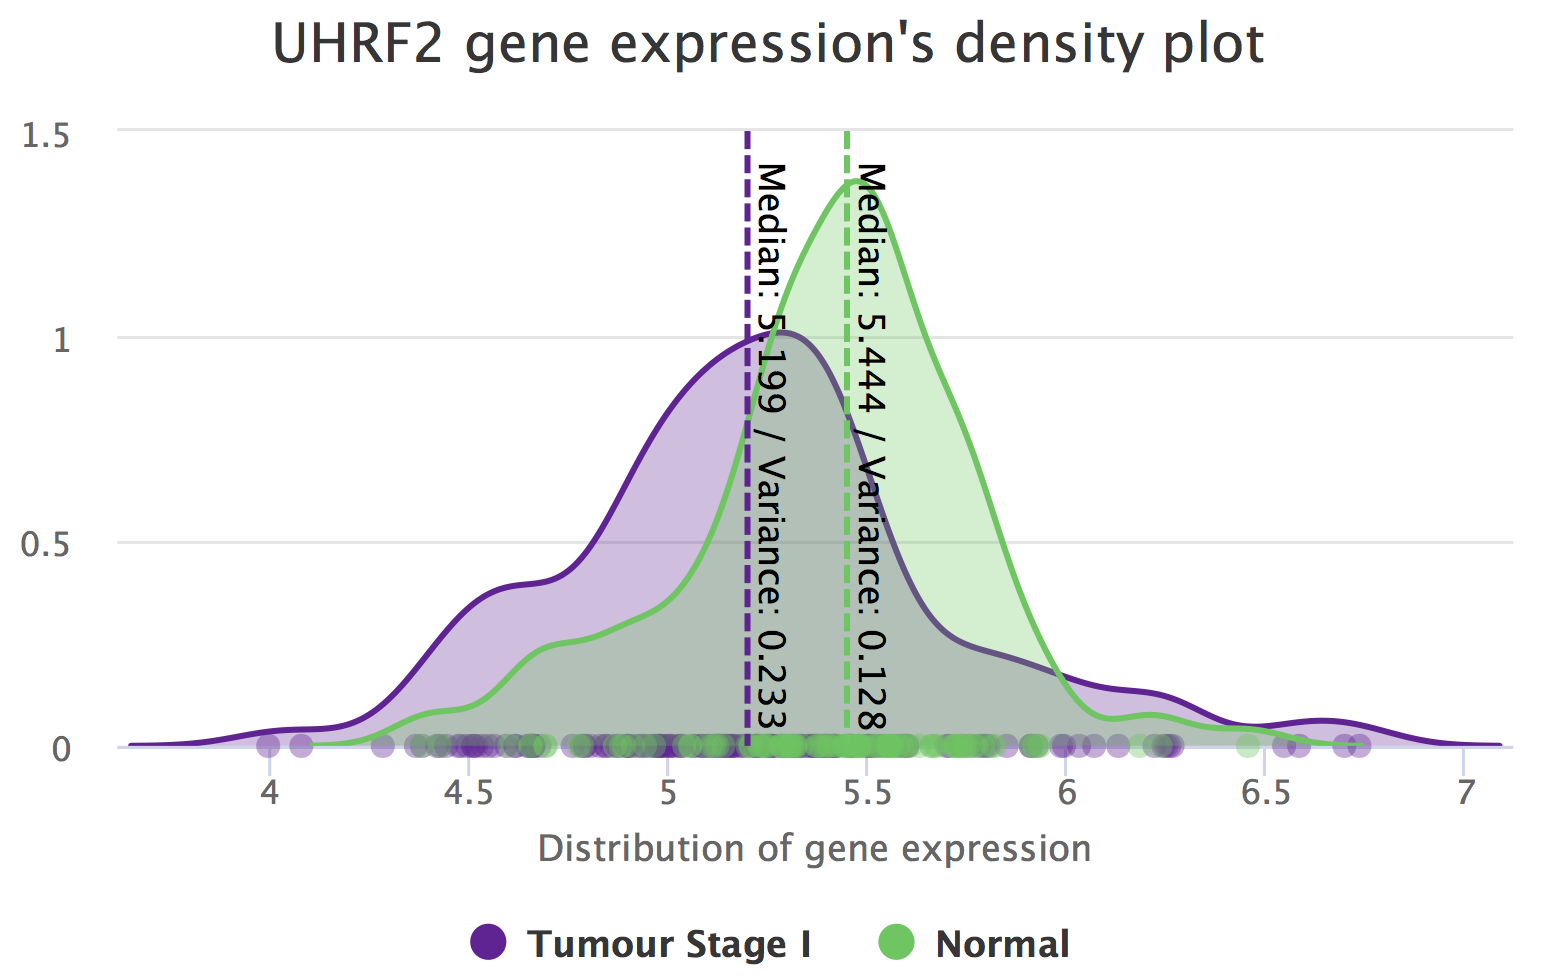 Differential expression of *UHRF2* between tumour stage I and normal samples.